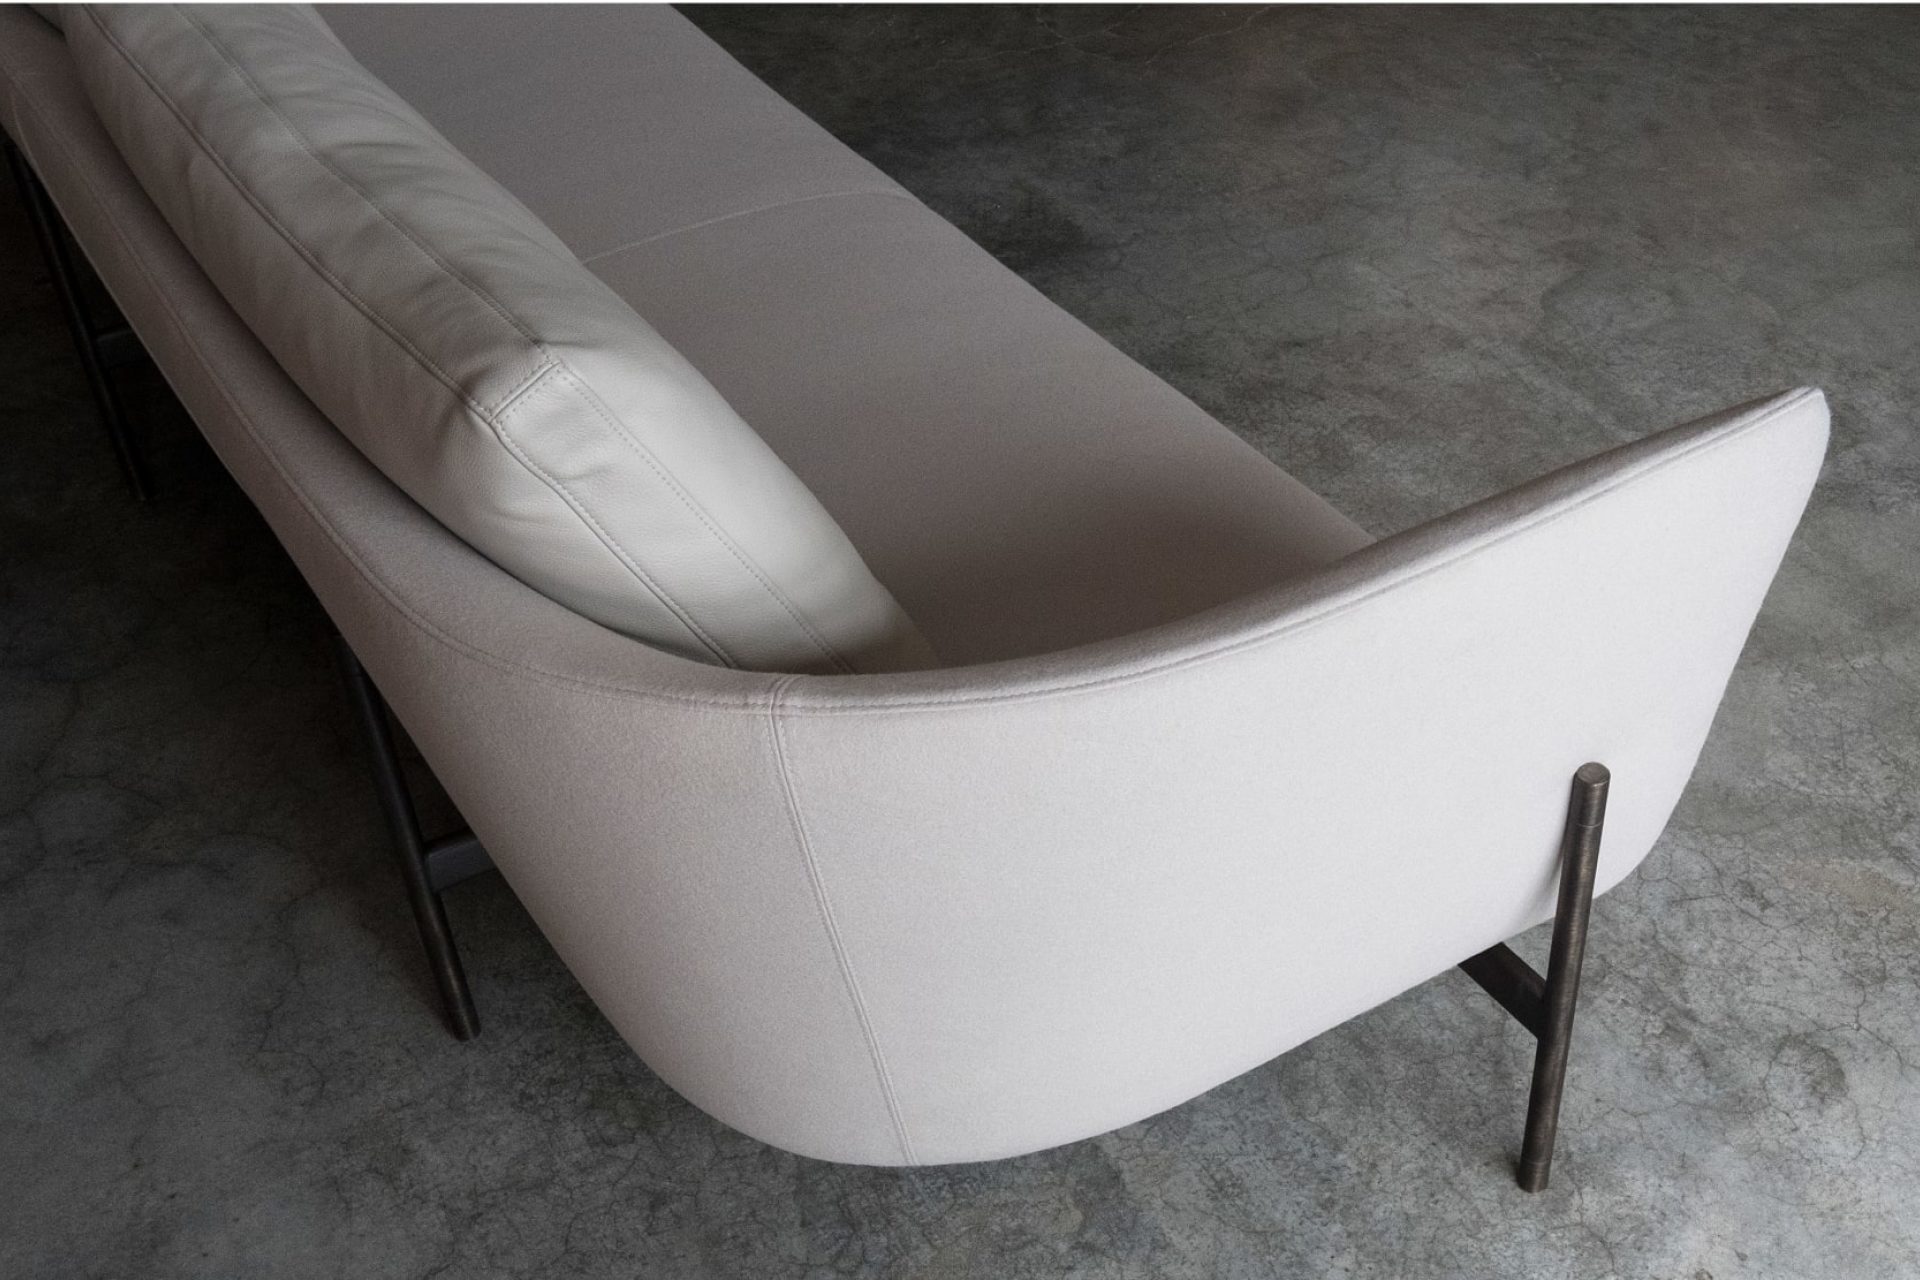 Picture depicting a beige canvas sofa with steel legs from above